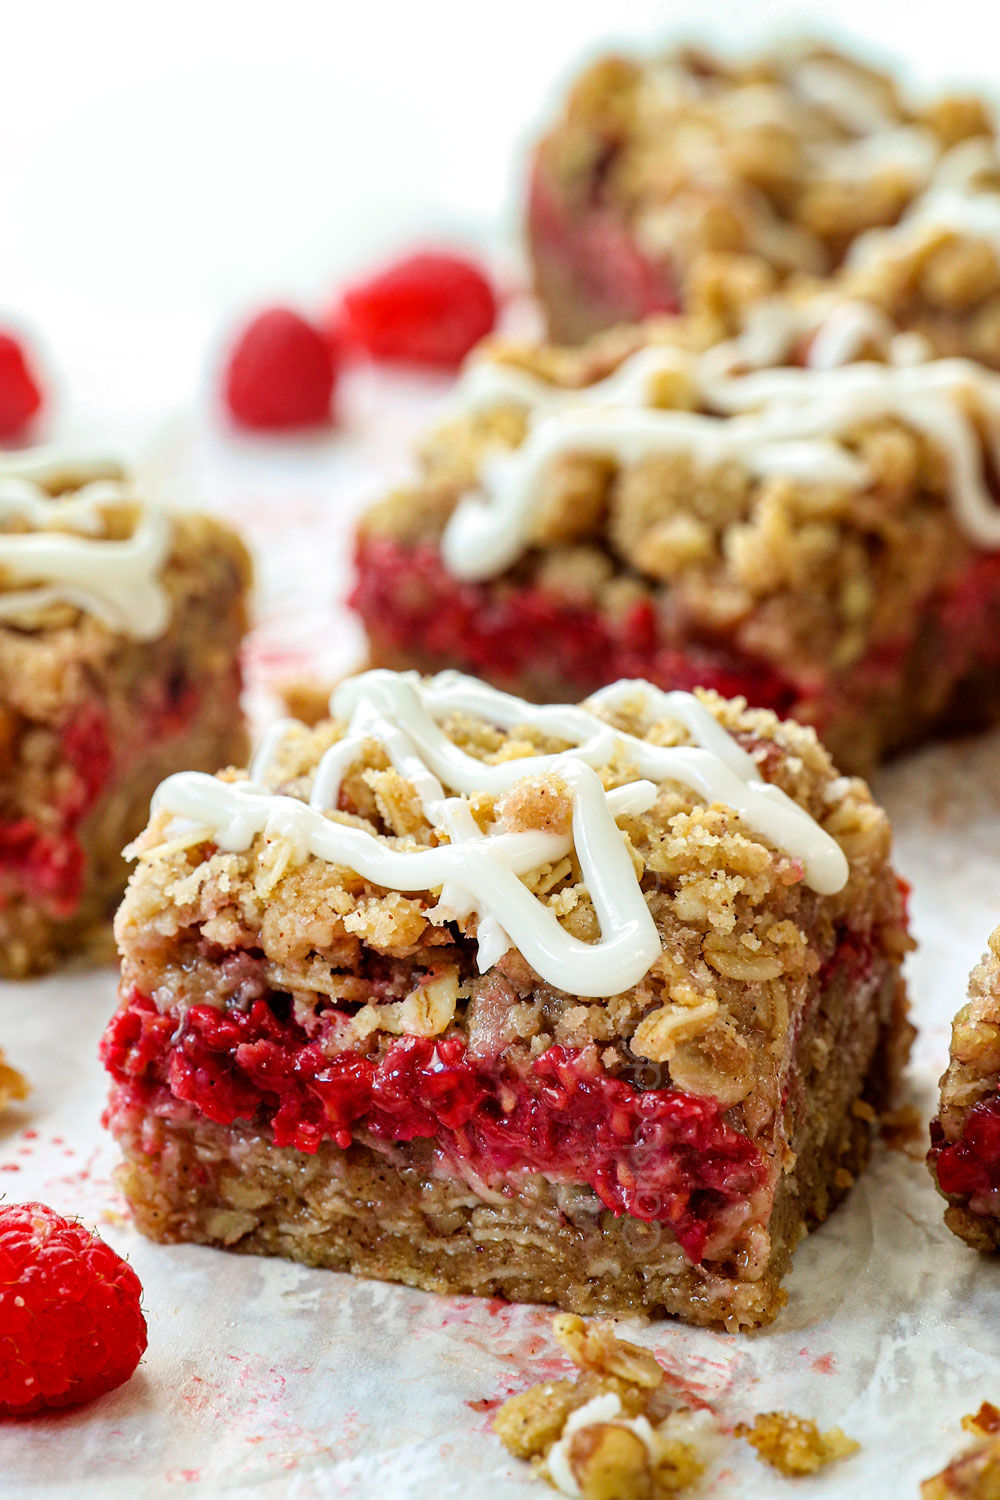 up close of raspberry oatmeal bars with icing showing how thick and chewy they are